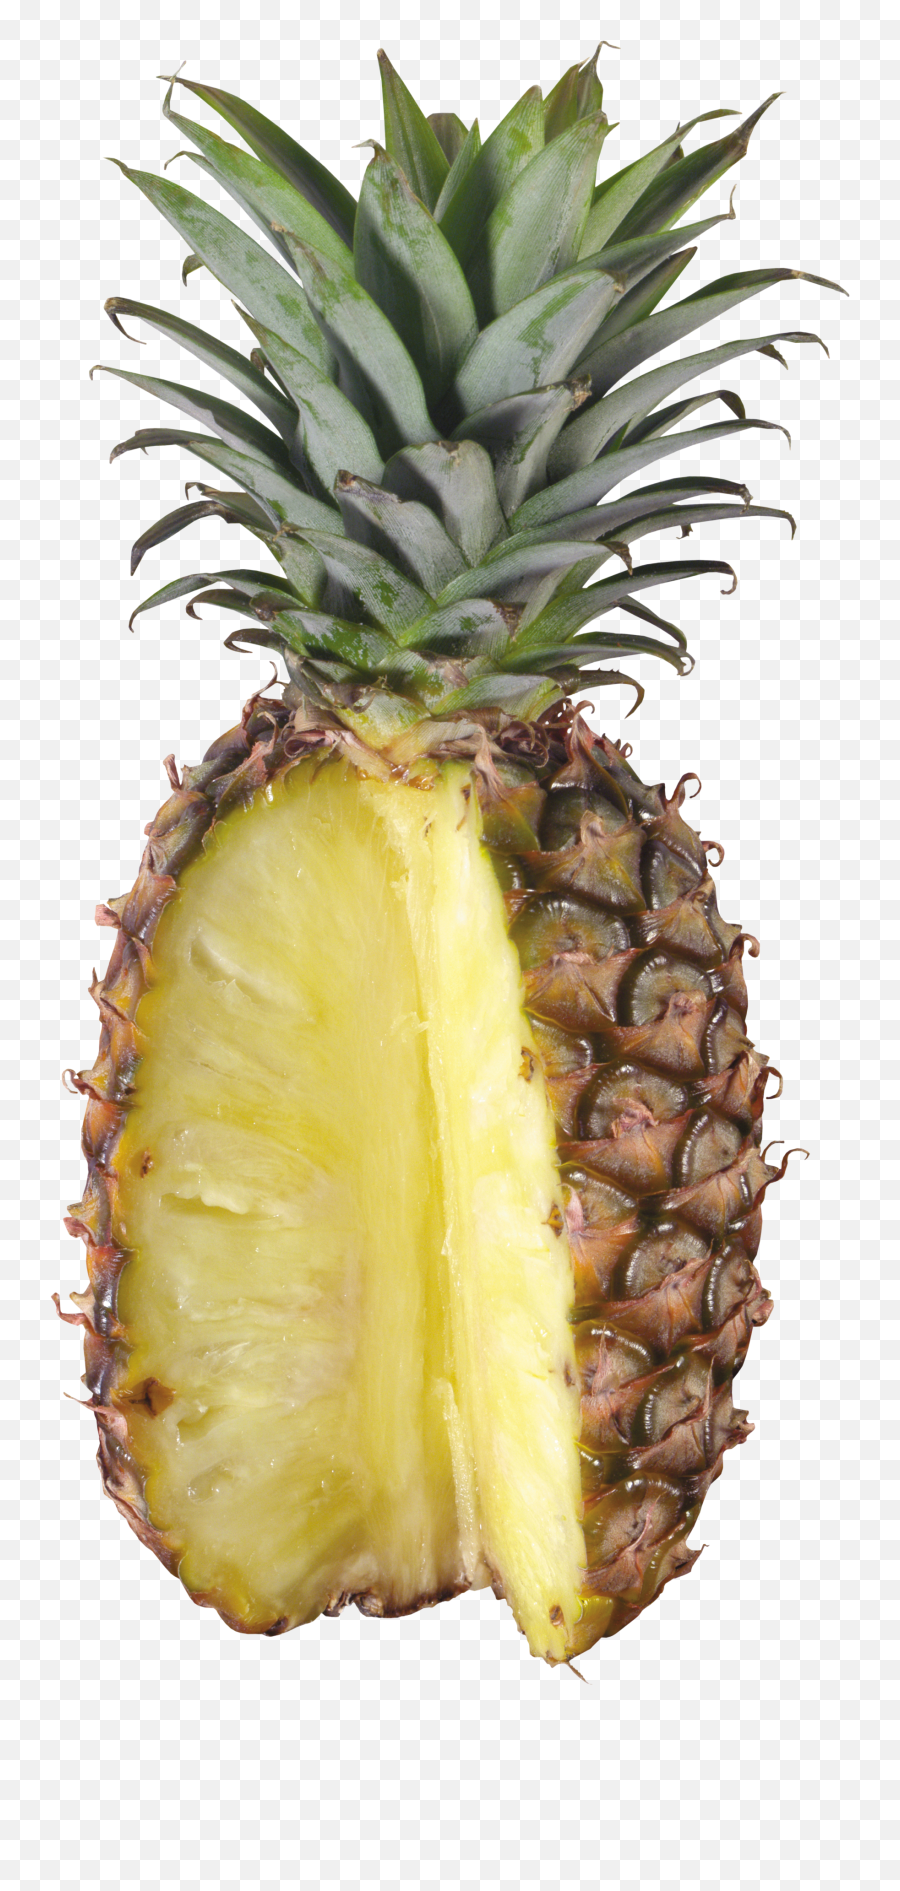 Pineapple Png Images Free Pictures Download - Kenwood Juice Extractor Jem500ss,Pinapple Png